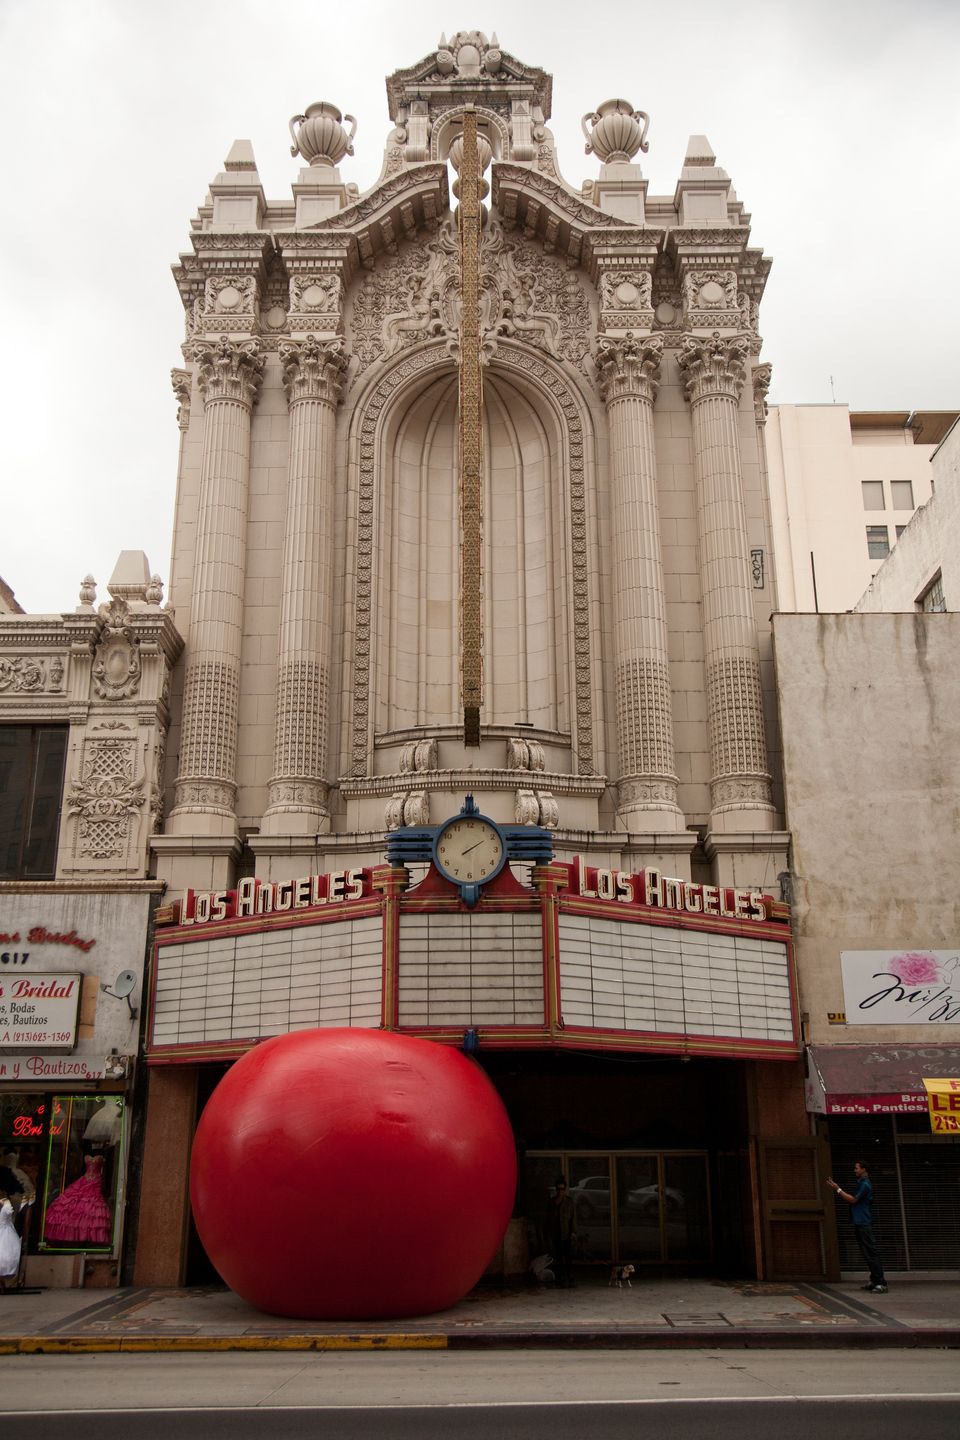 Day 1: Los Angeles Theater in Downtown LA